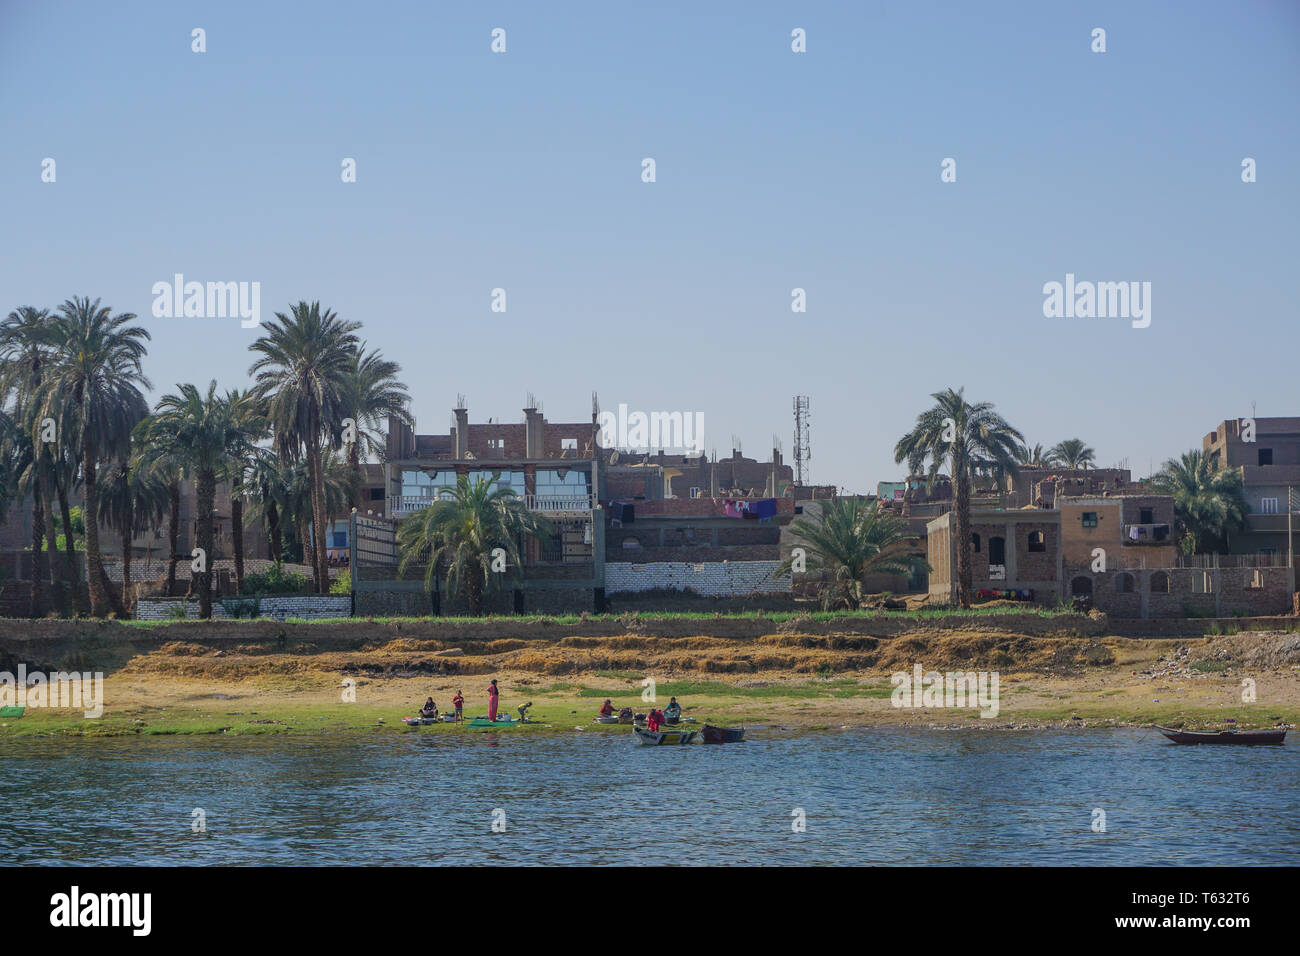 Nile River, Egypt: People, rowboats, houses, and date palm trees along the east bank of the Nile River. Stock Photo